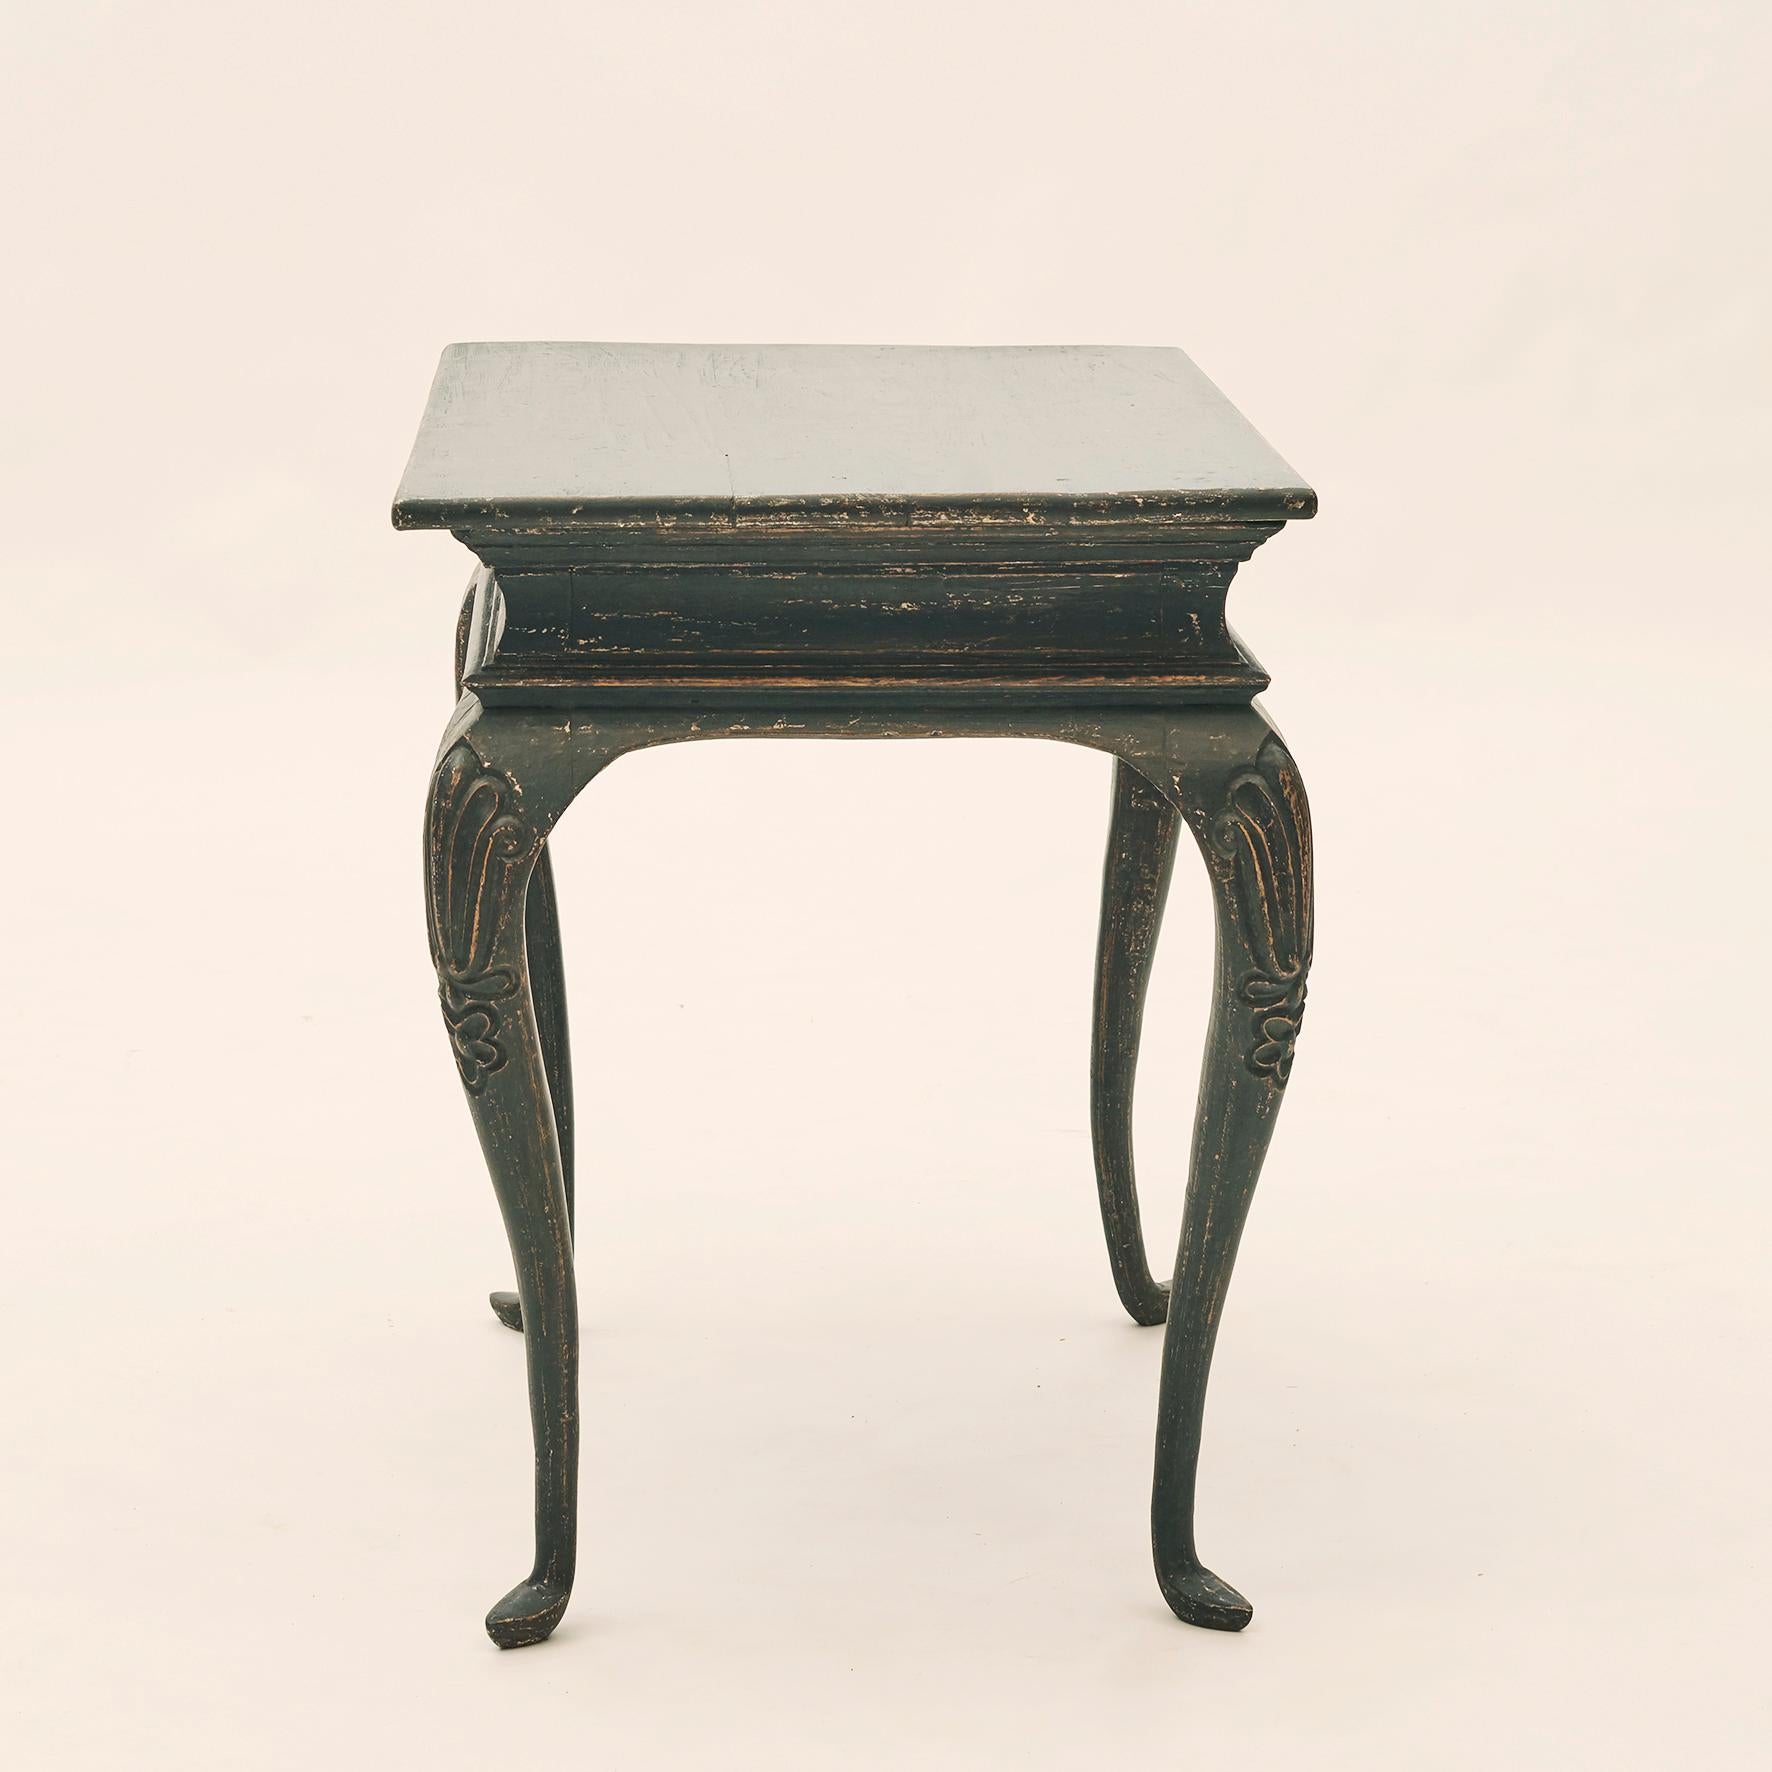 Rococo table black painted pine, good patina. Features a rectangular top with elegant apron. The table is raised on four cabriole legs with ornamented floral cuts at the top, Denmark, circa 1770.

This Danish Rococo side table from the 1770s has a